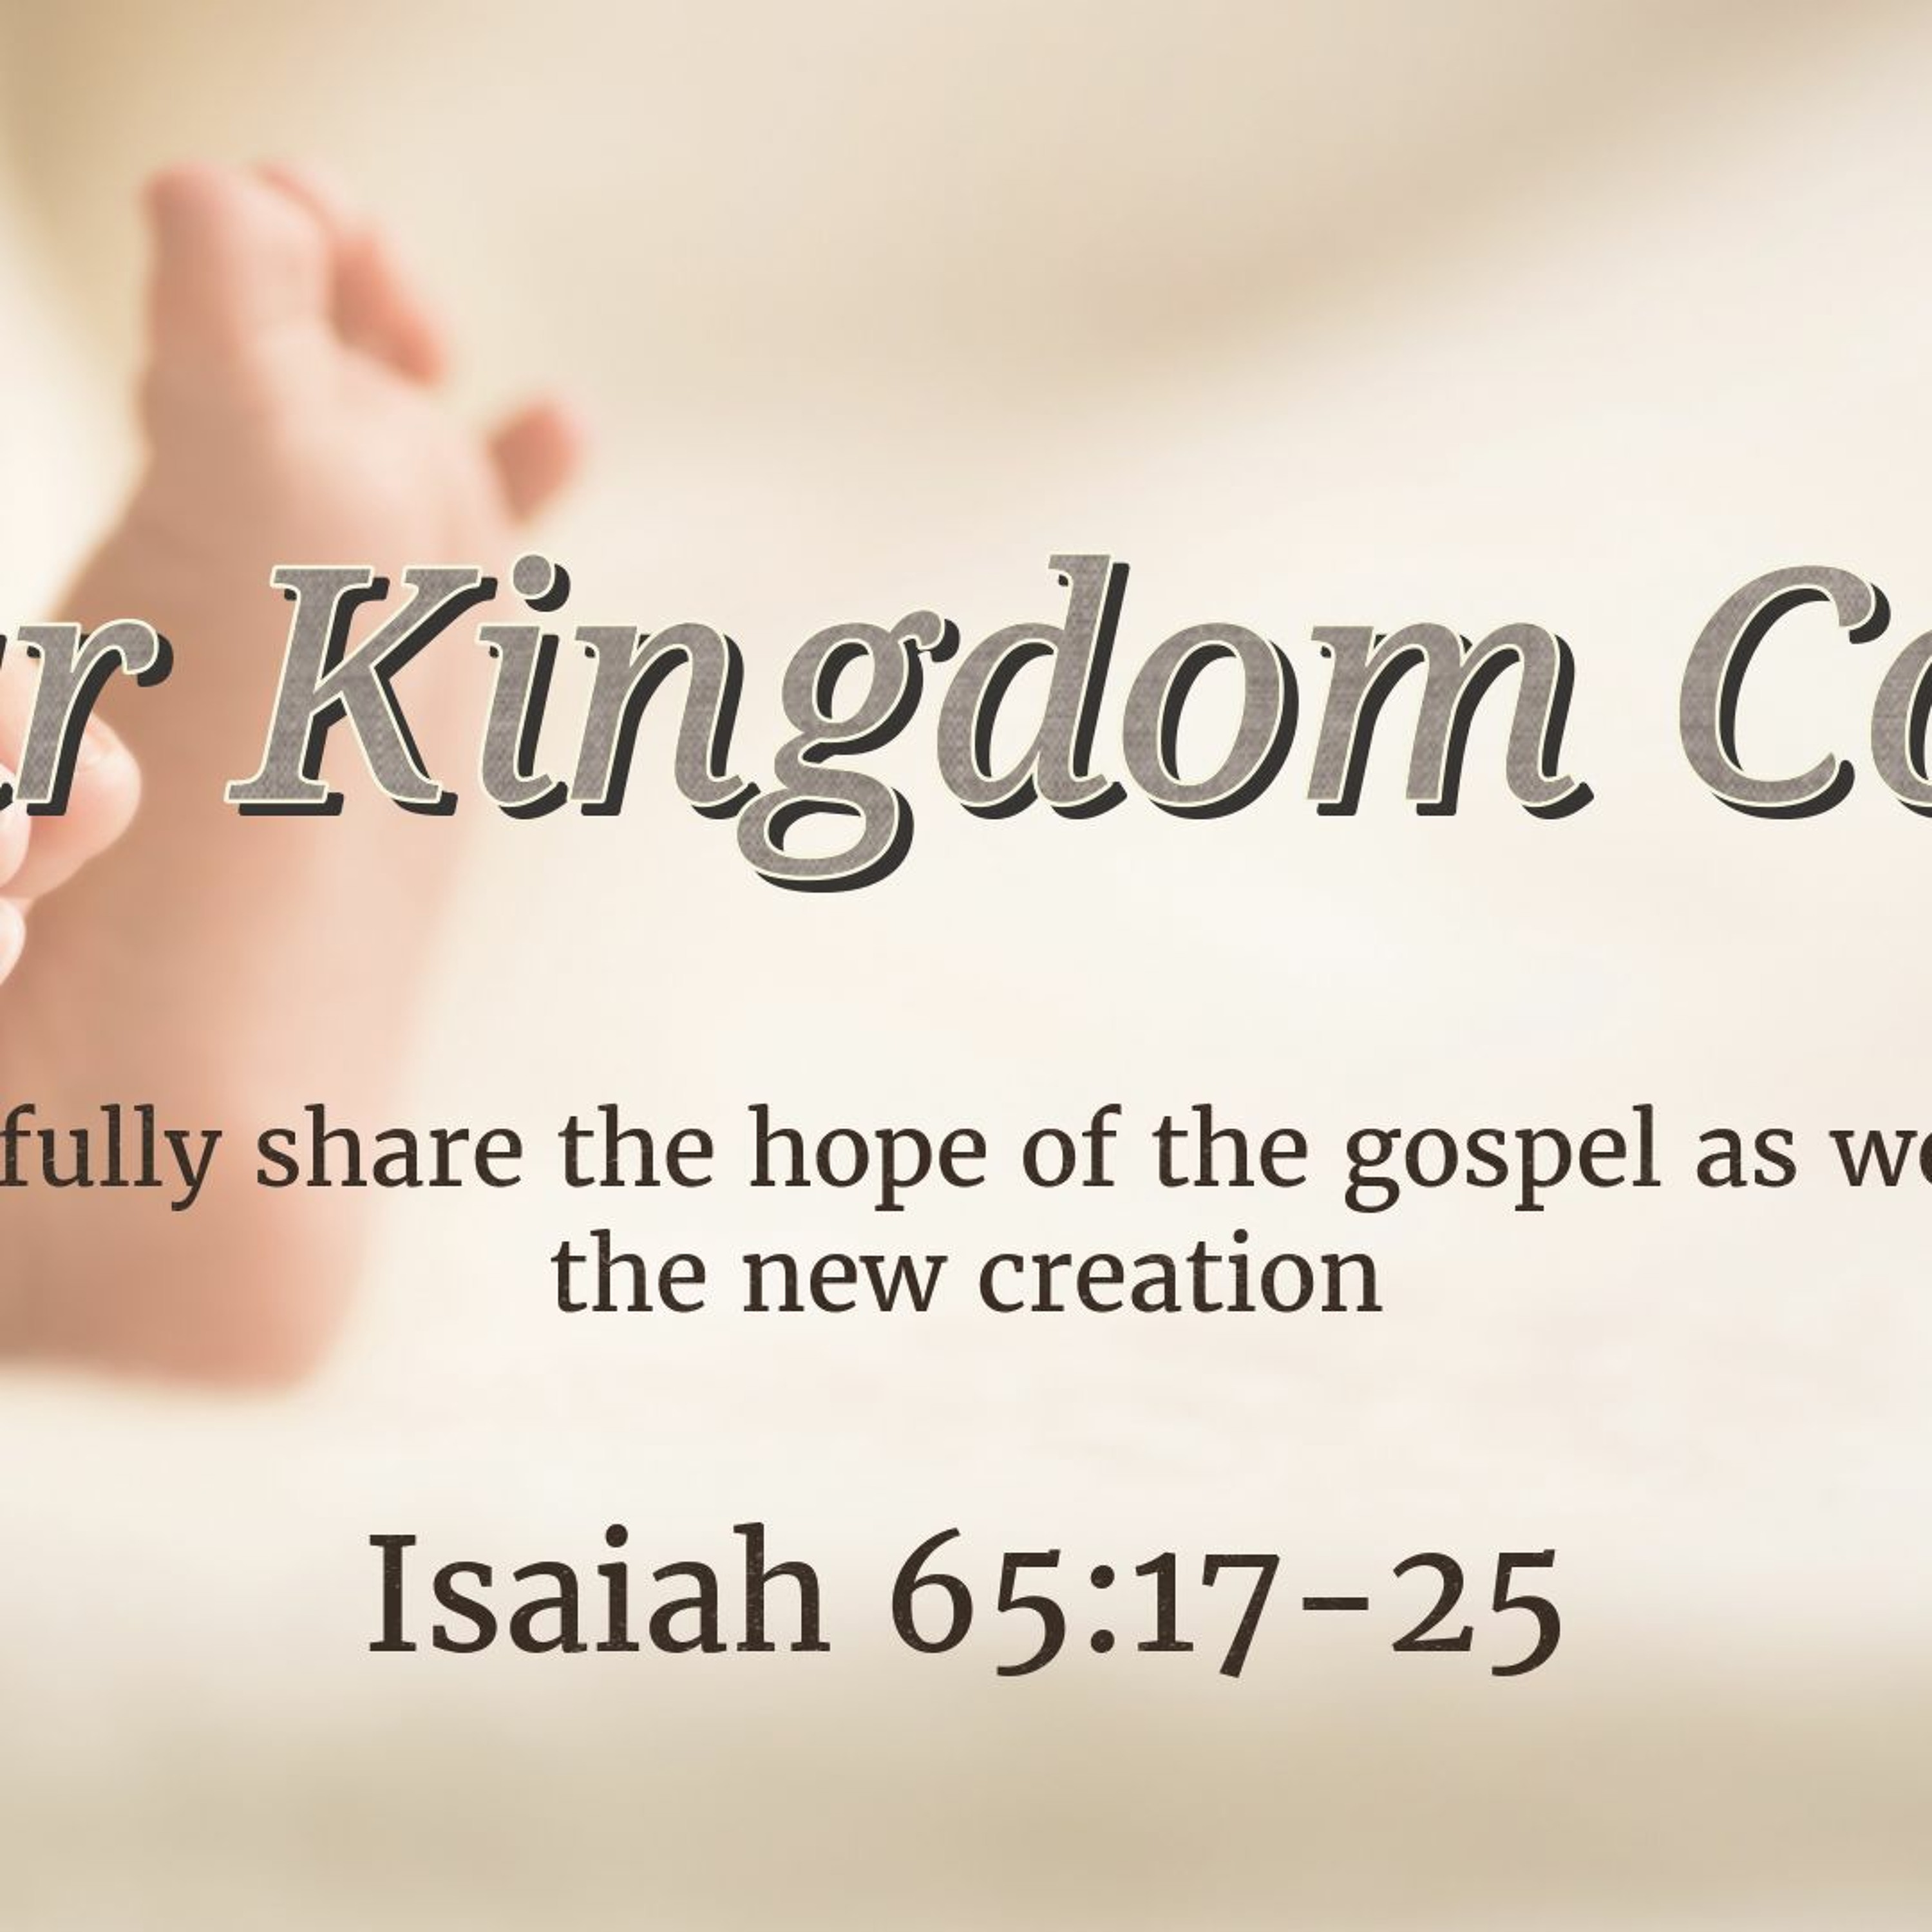 Your Kingdom Come (Isaiah 65:17-25)